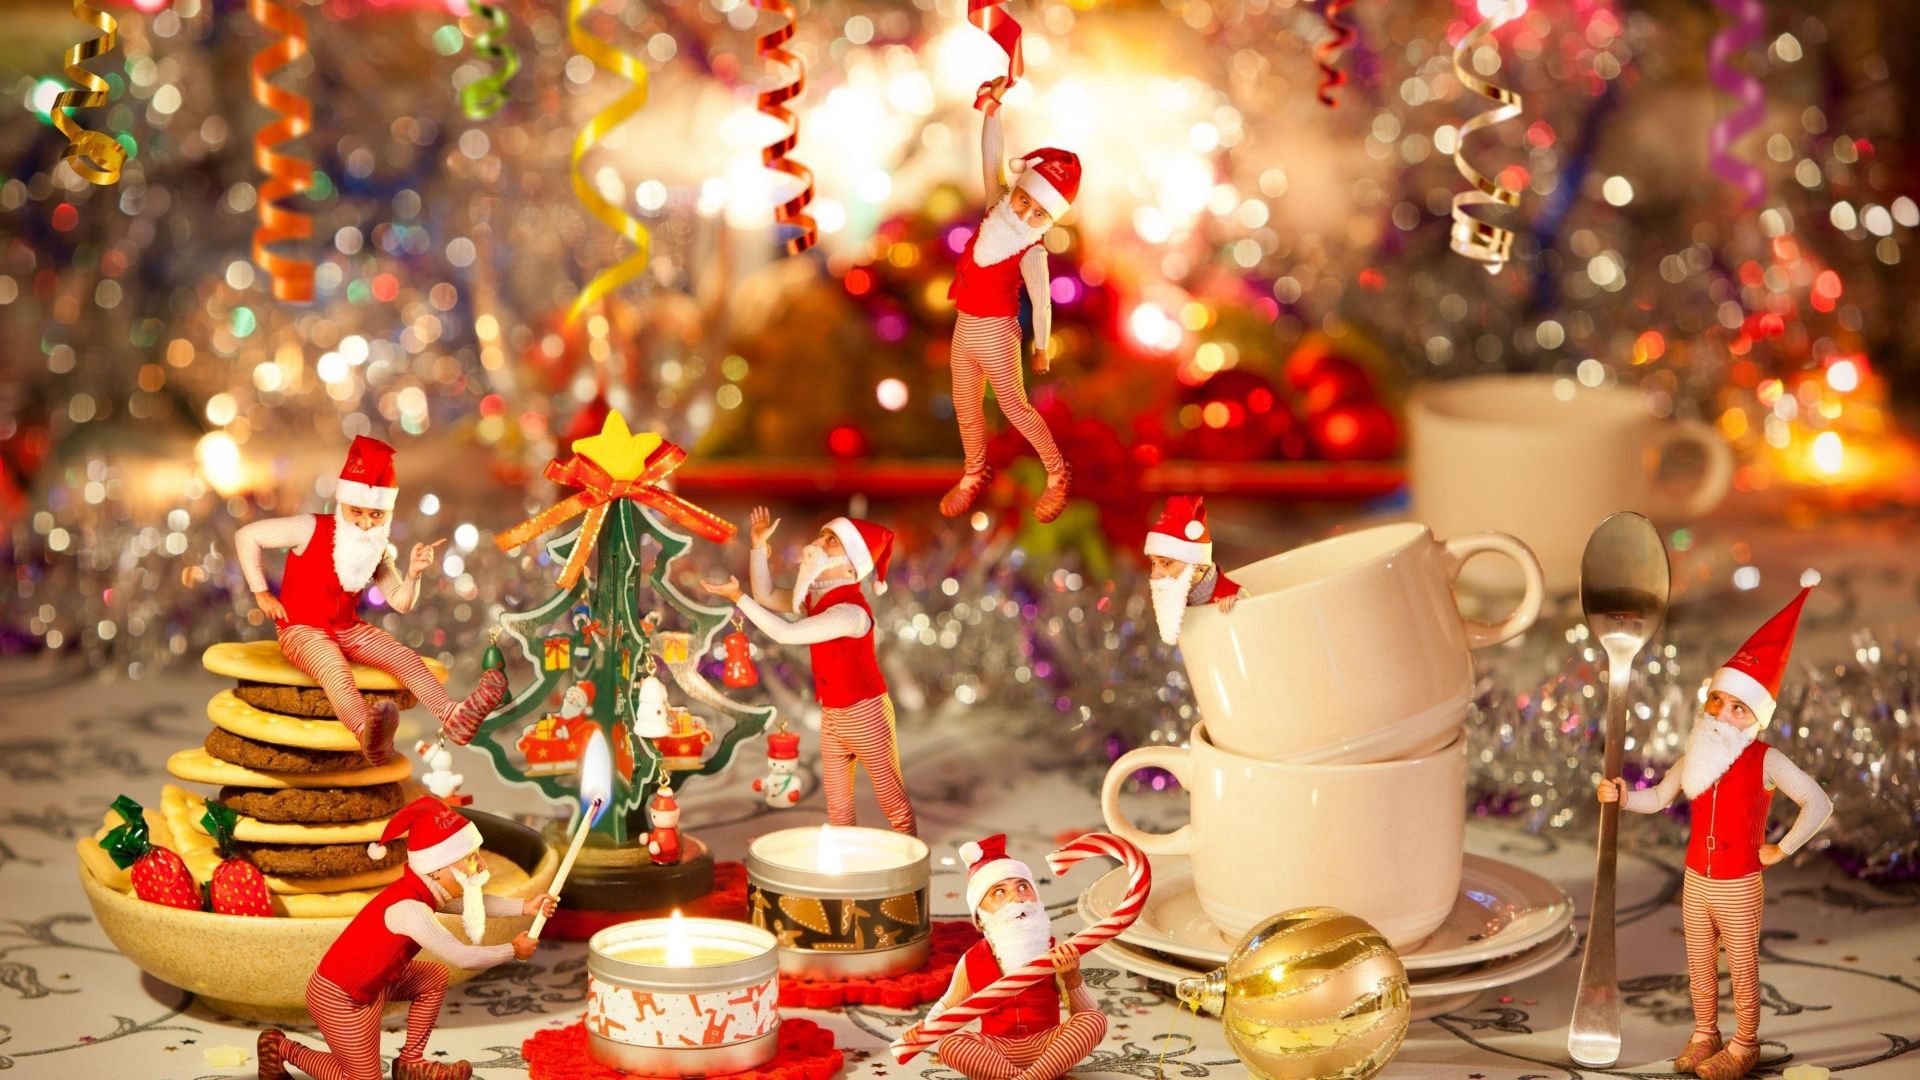 Download Wallpaper 1920x1080 gnomes, christmas tree, candles, table, cup Full HD 1080p HD Background